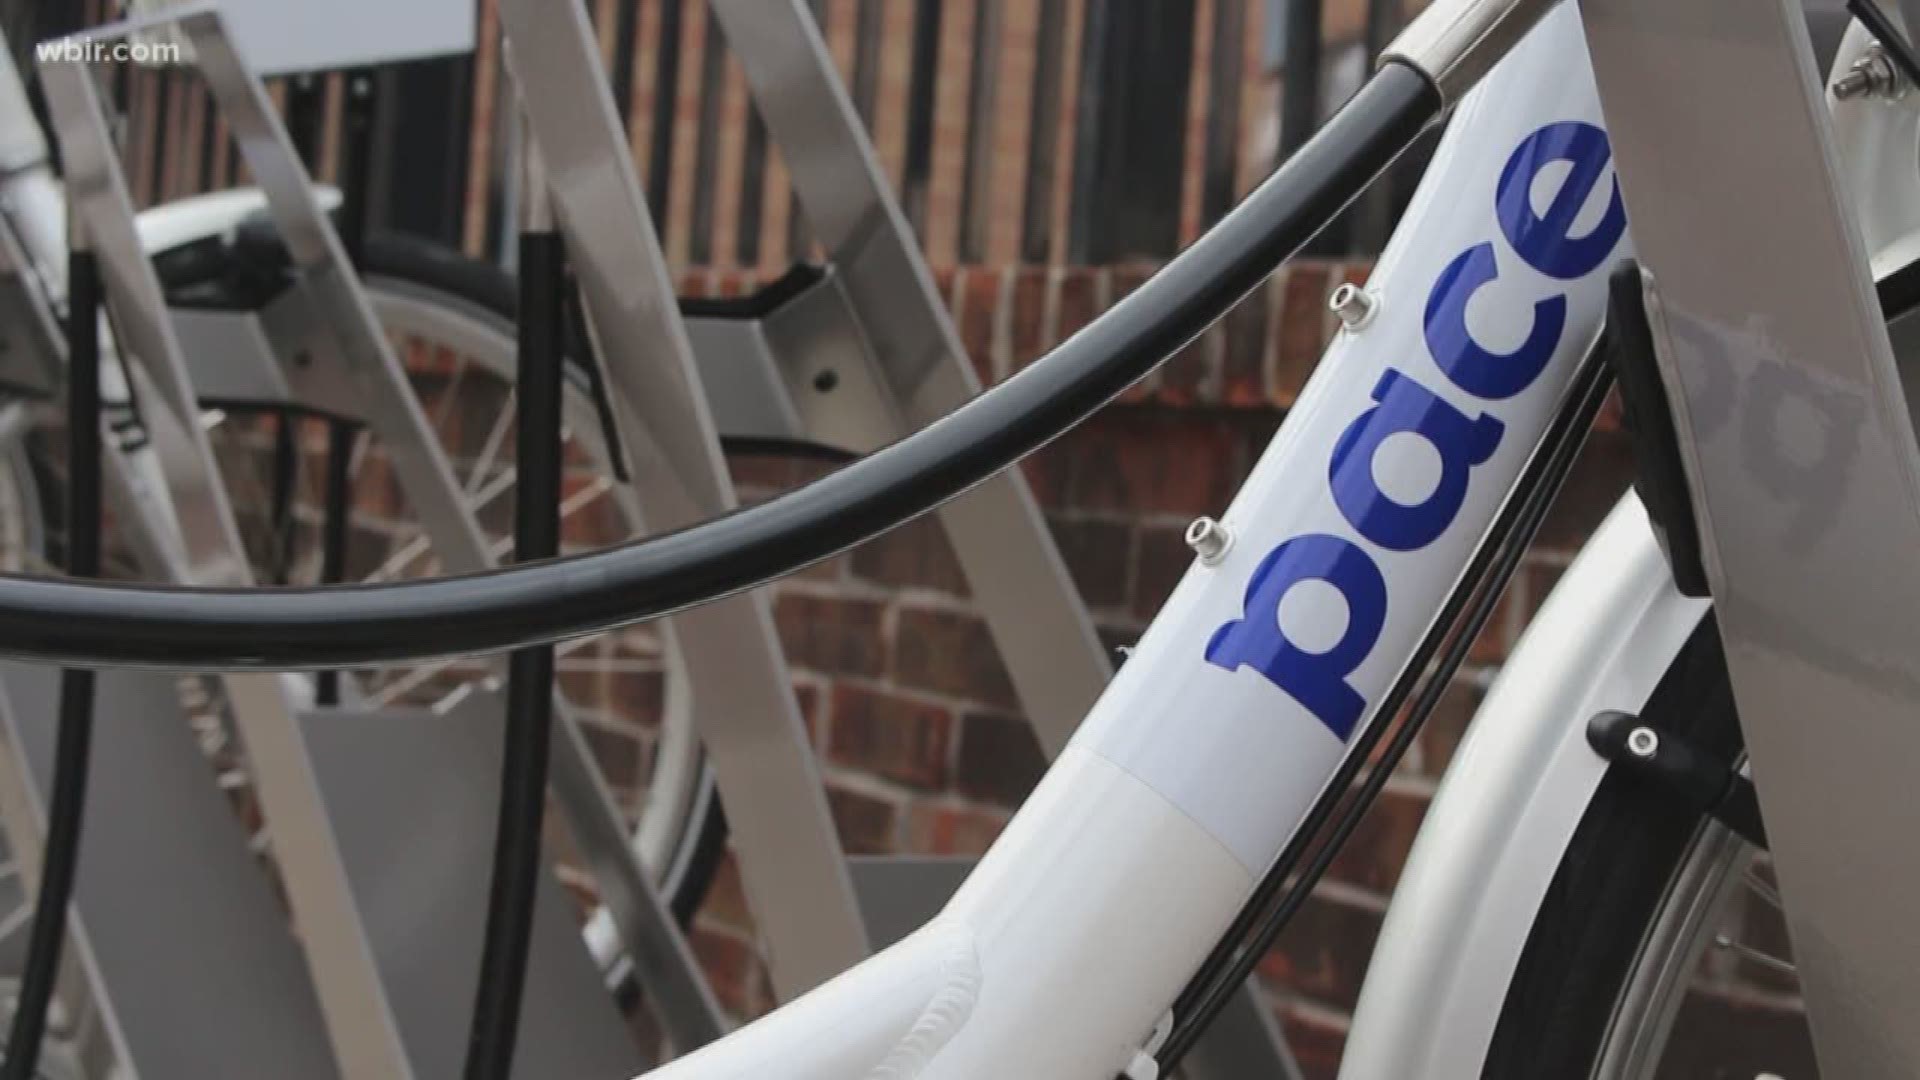 The Pace bike share app has been downloaded more than 1,600 times in Knoxville.